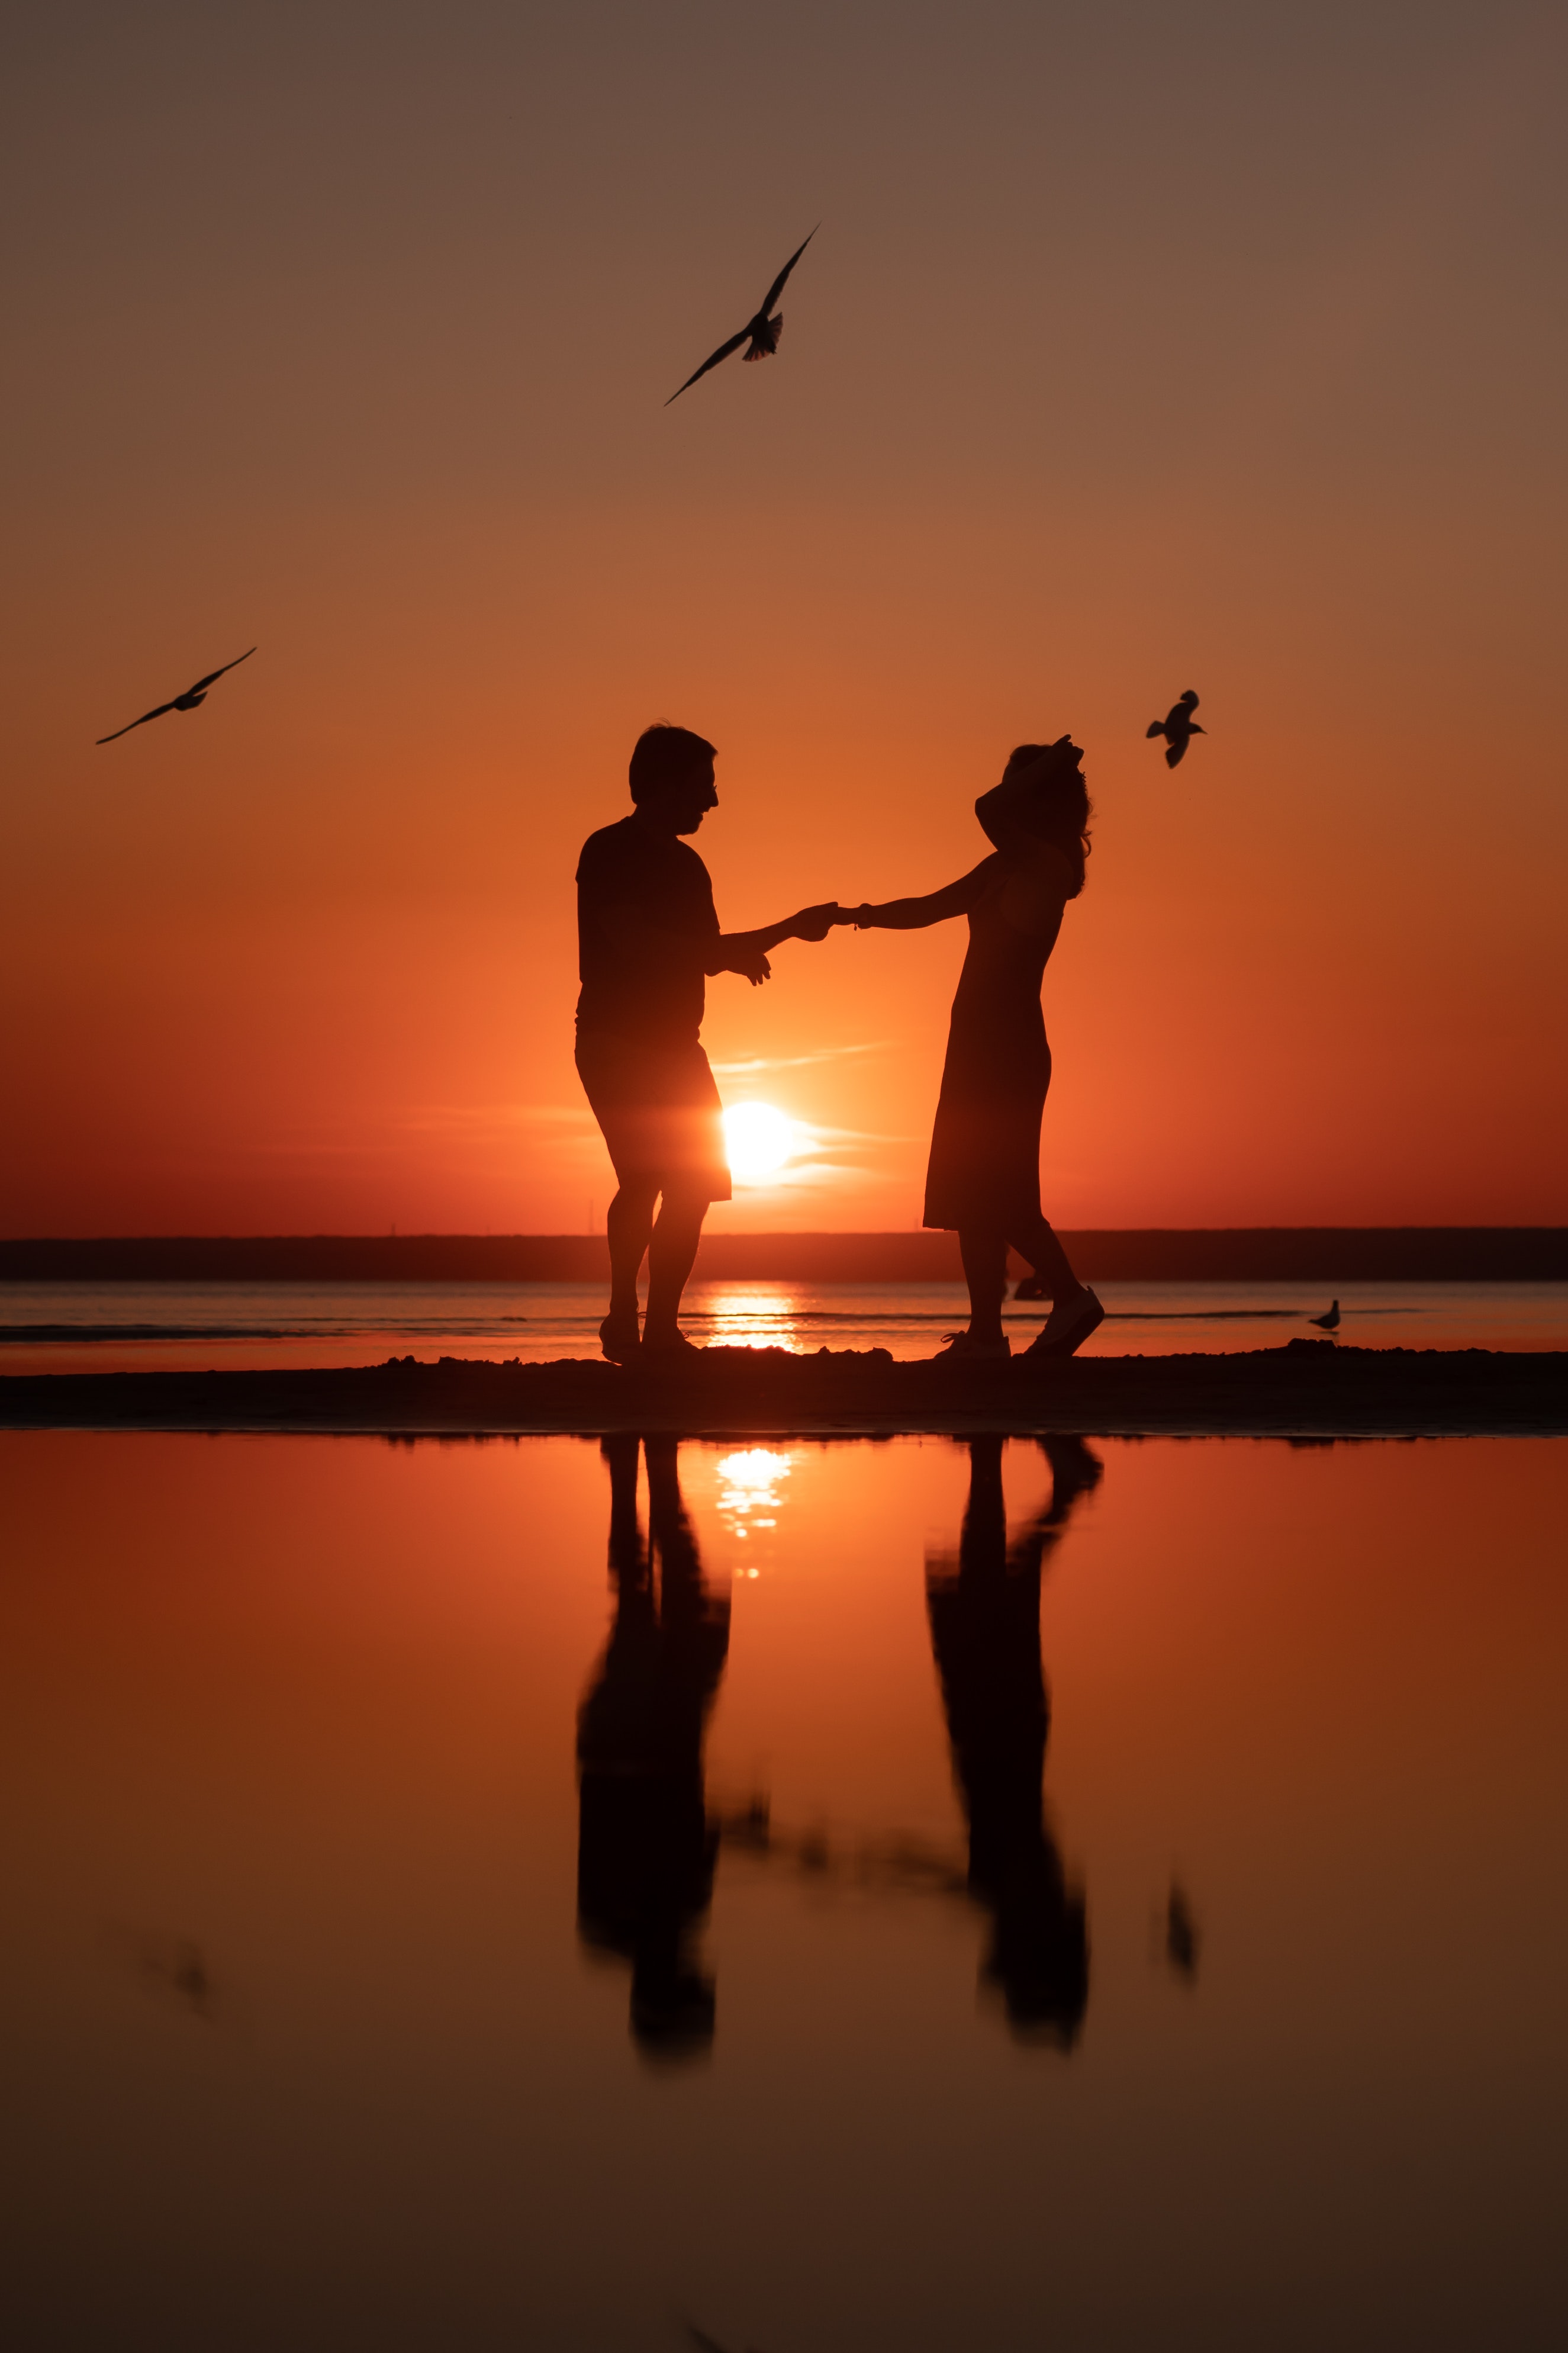 A couple dancing together on the beach. | Source: Pexels